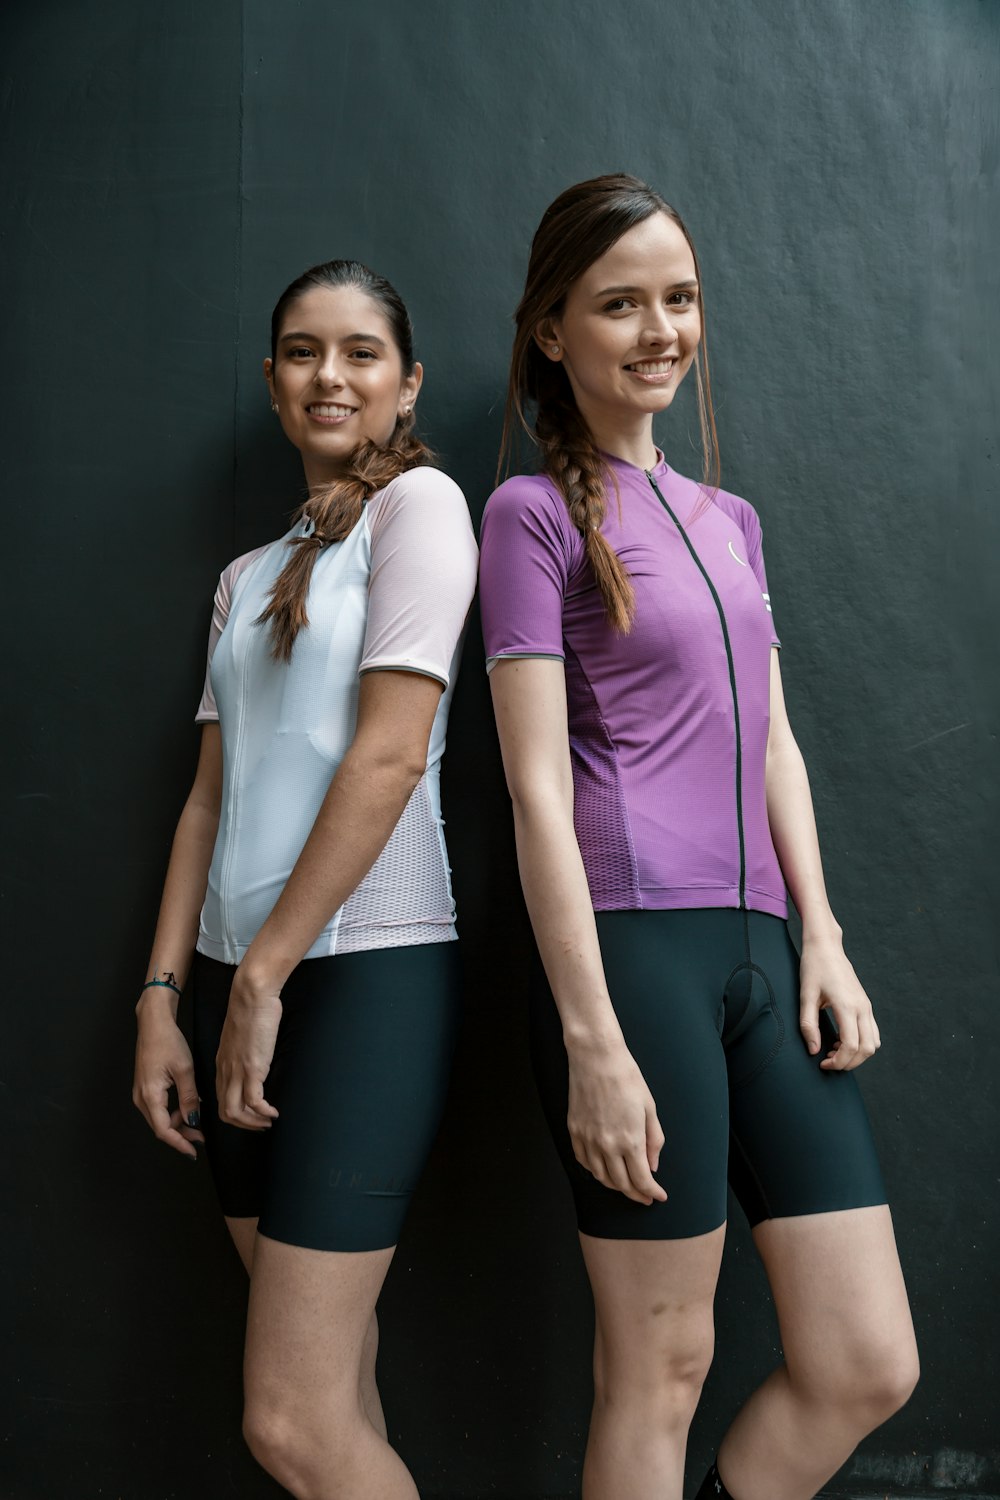 woman in pink shirt beside woman in white polo shirt